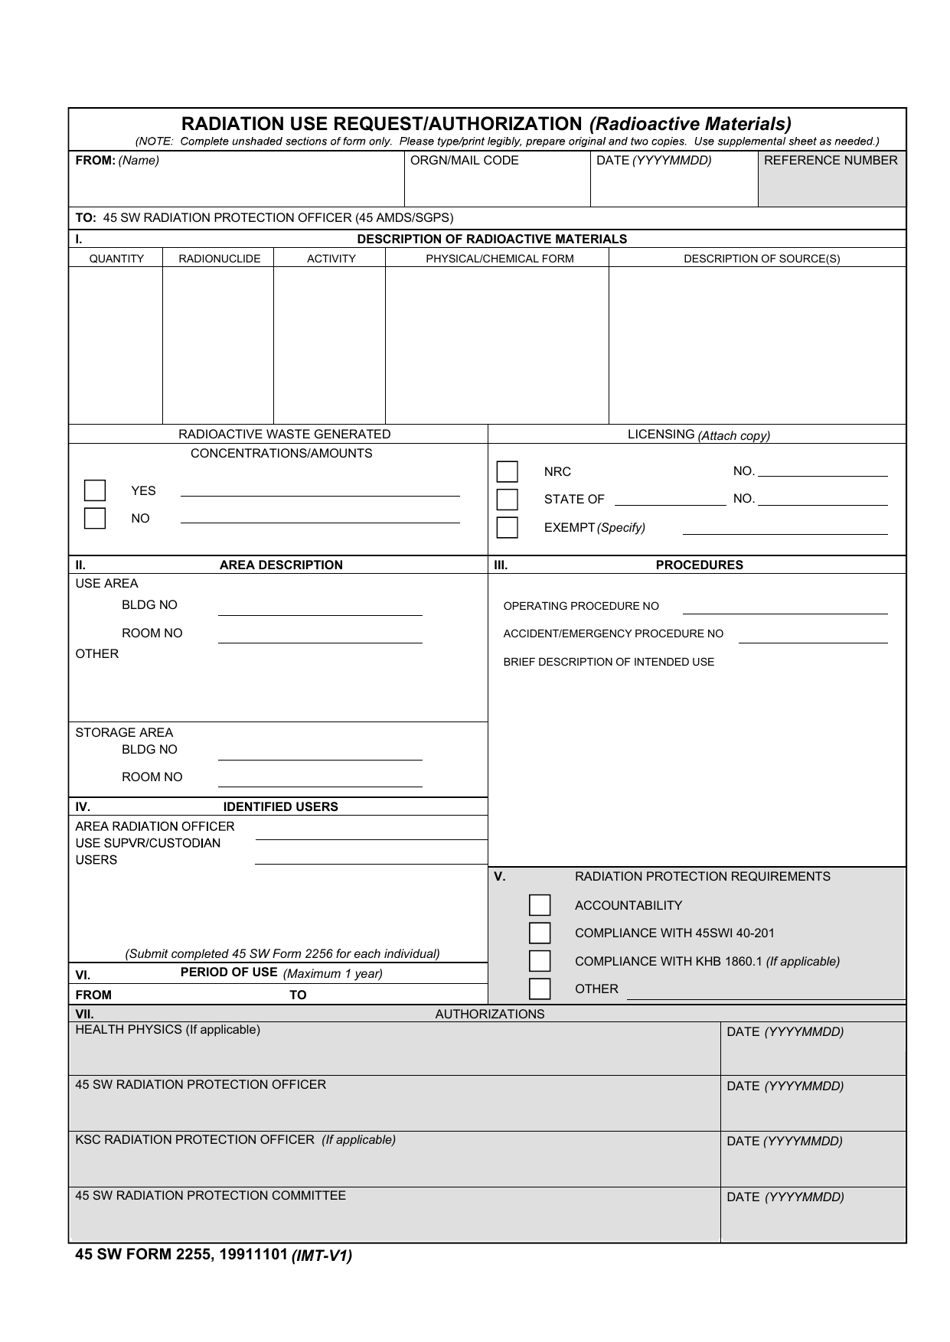 45-sw-form-2255-download-fillable-pdf-or-fill-online-radiation-use